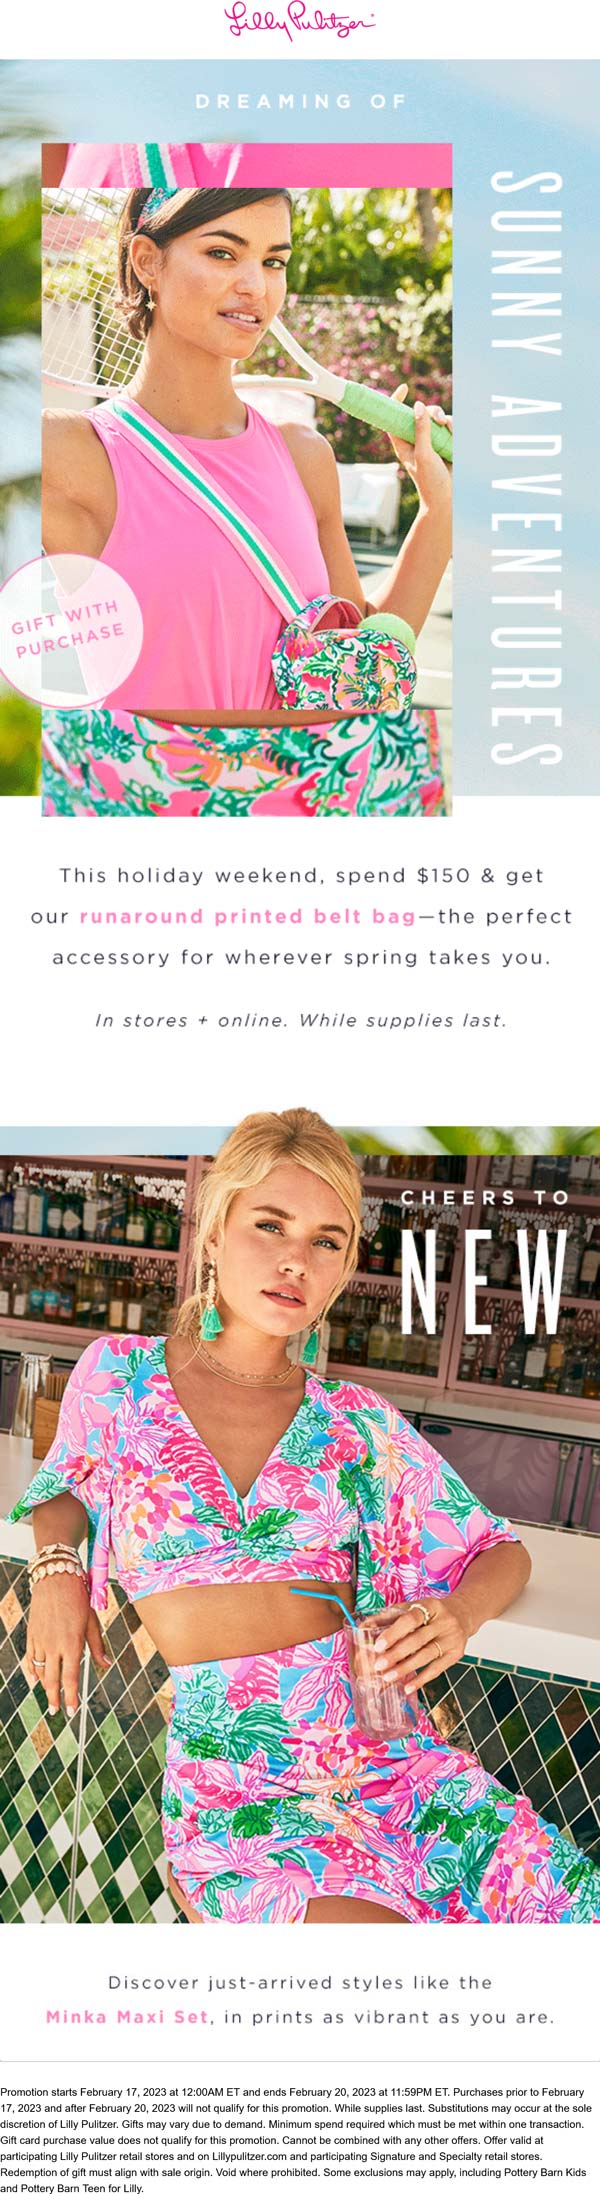 Free belt bag on 150 at Lilly Pulitzer, ditto online lillypulitzer